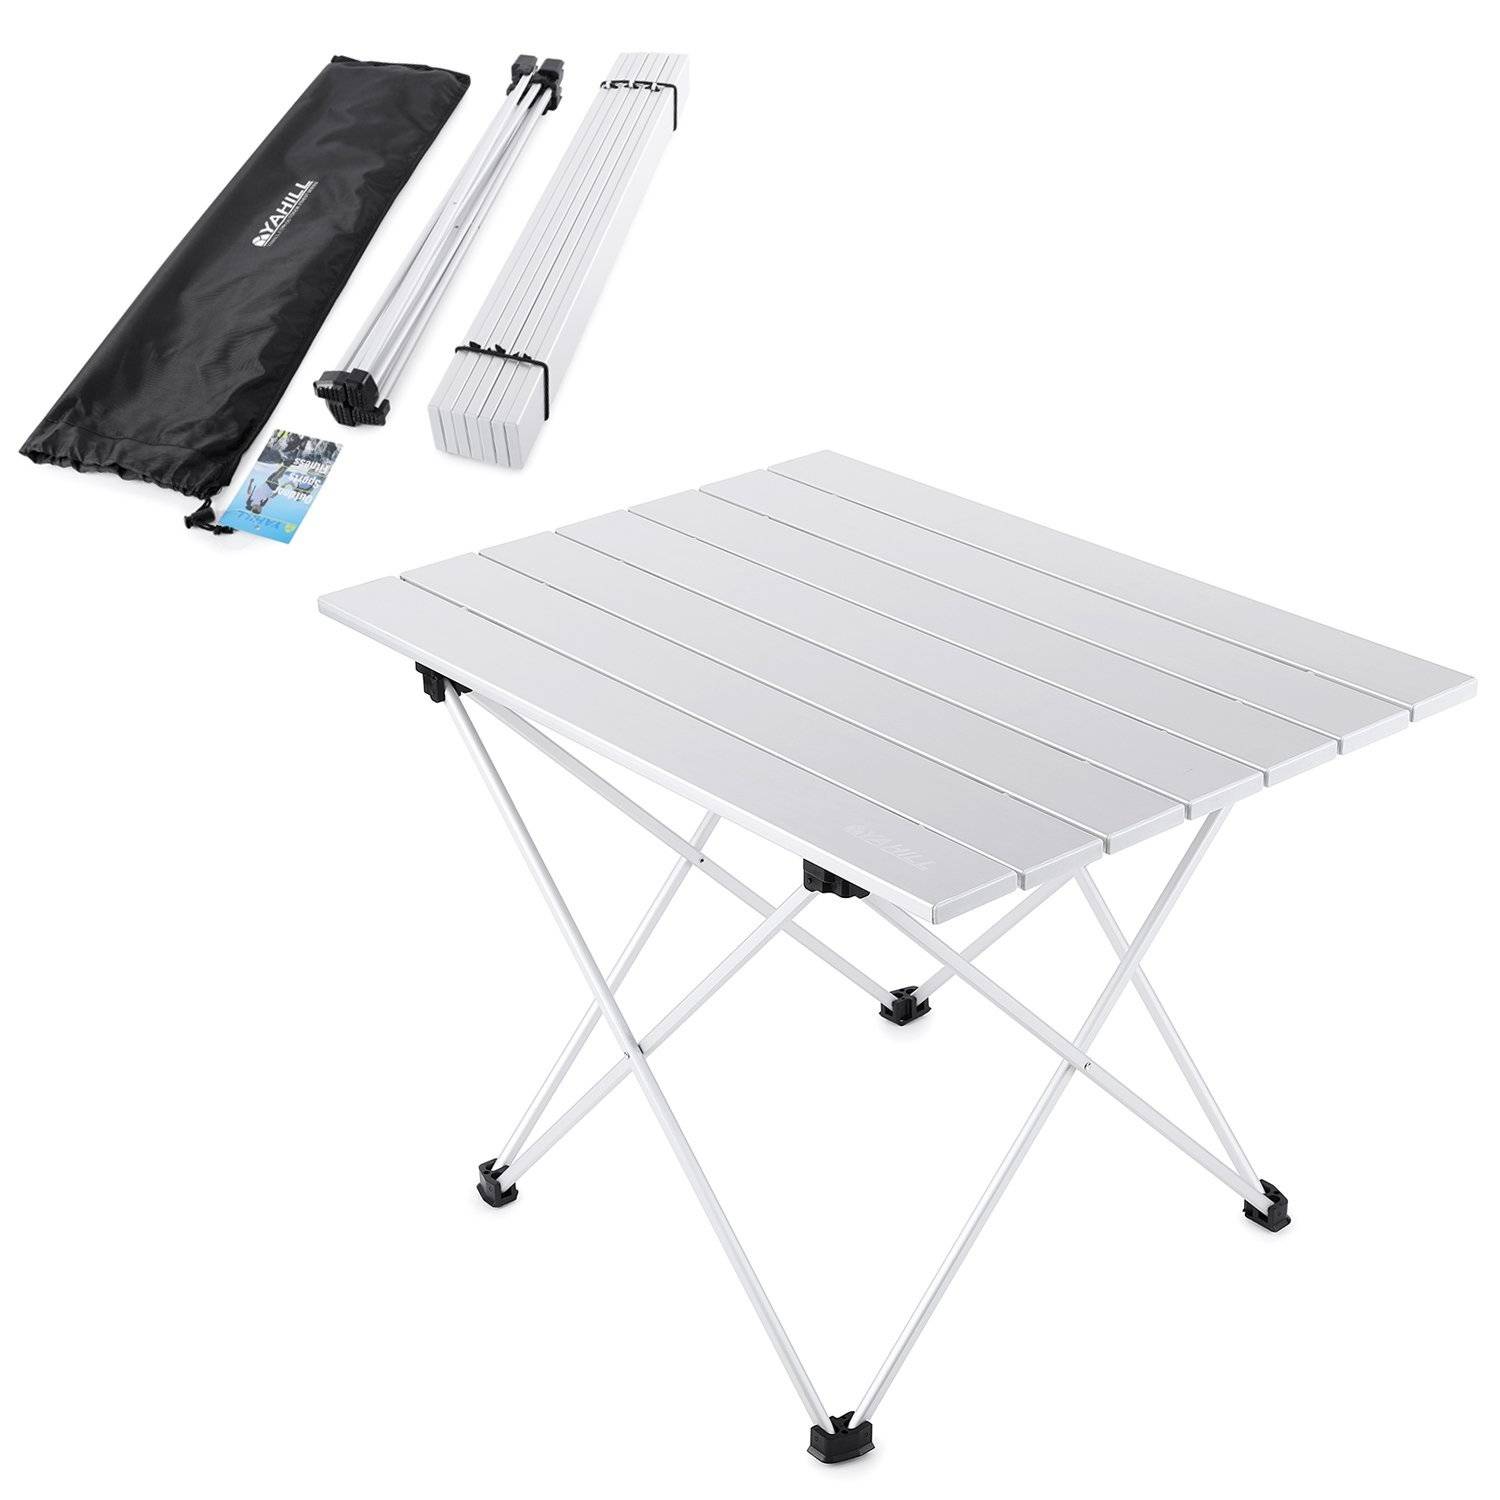 Yahill Aluminum Folding Collapsible Camping Table with Carrying Bag